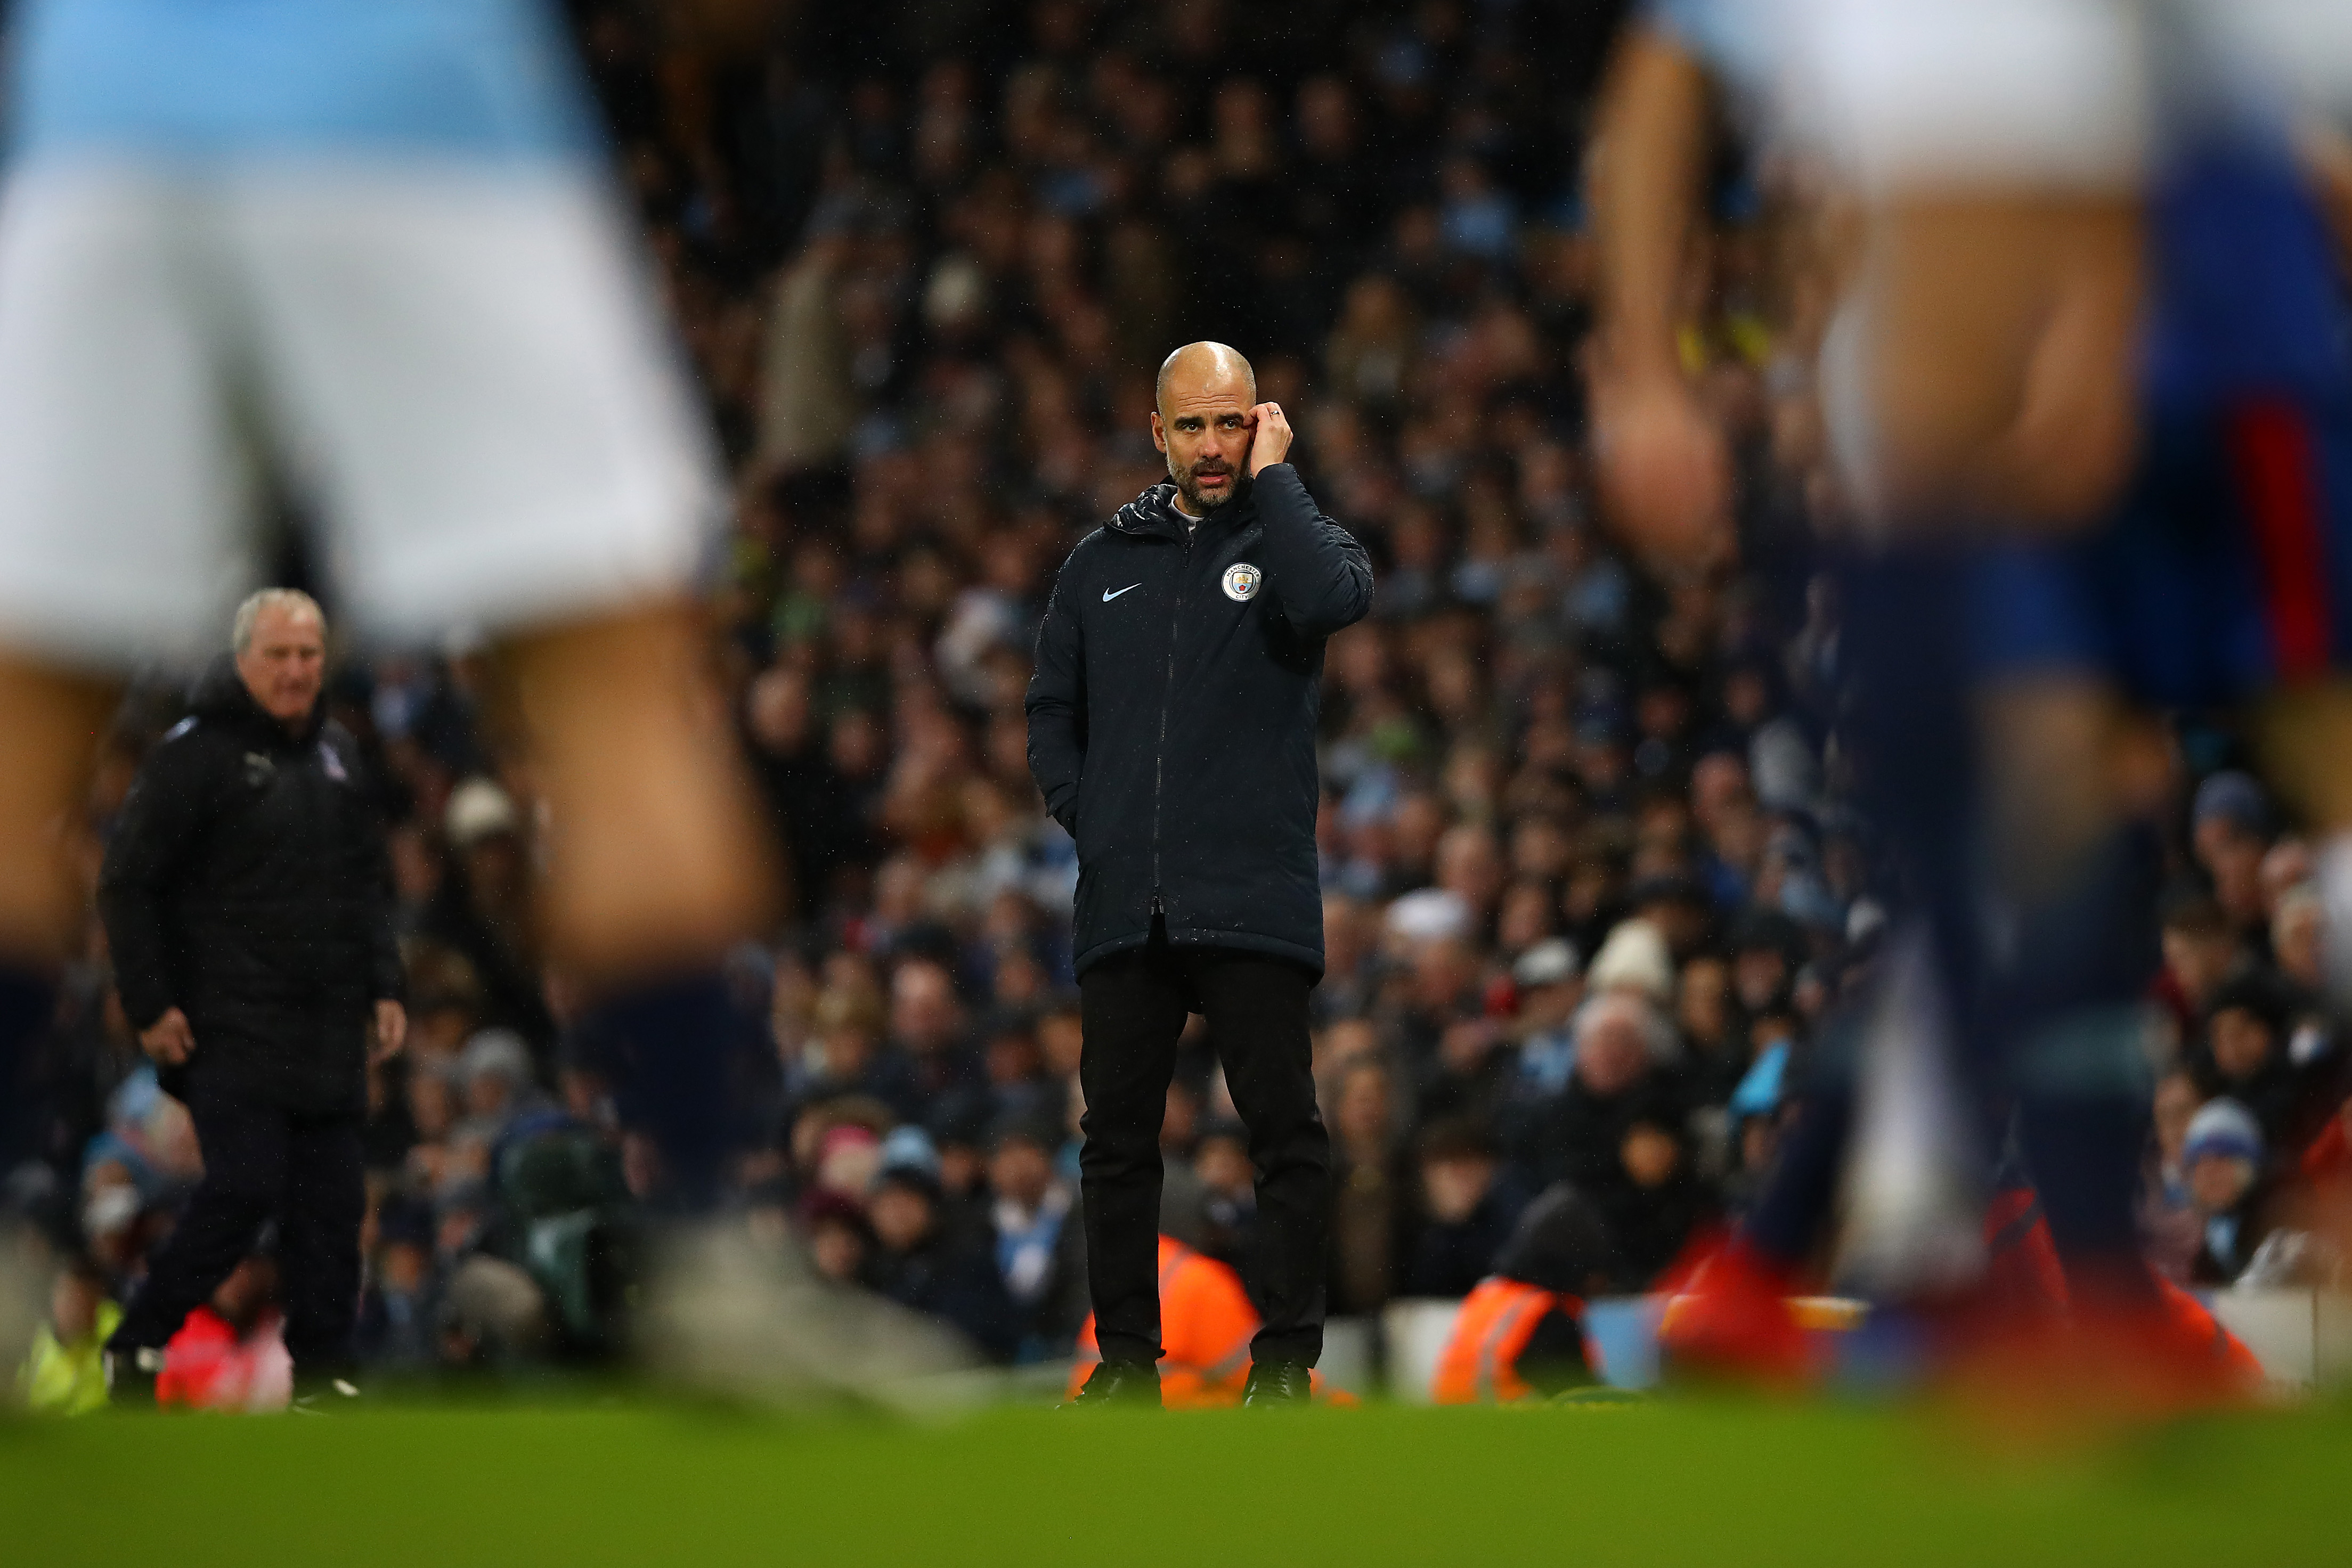 MANCHESTER, ENGLAND - DECEMBER 22: Josep Guardiola, Manager of Manchester City shows his dejection during the Premier League match between Manchester City and Crystal Palace at Etihad Stadium on December 22, 2018 in Manchester, United Kingdom. (Photo by Clive Brunskill/Getty Images)